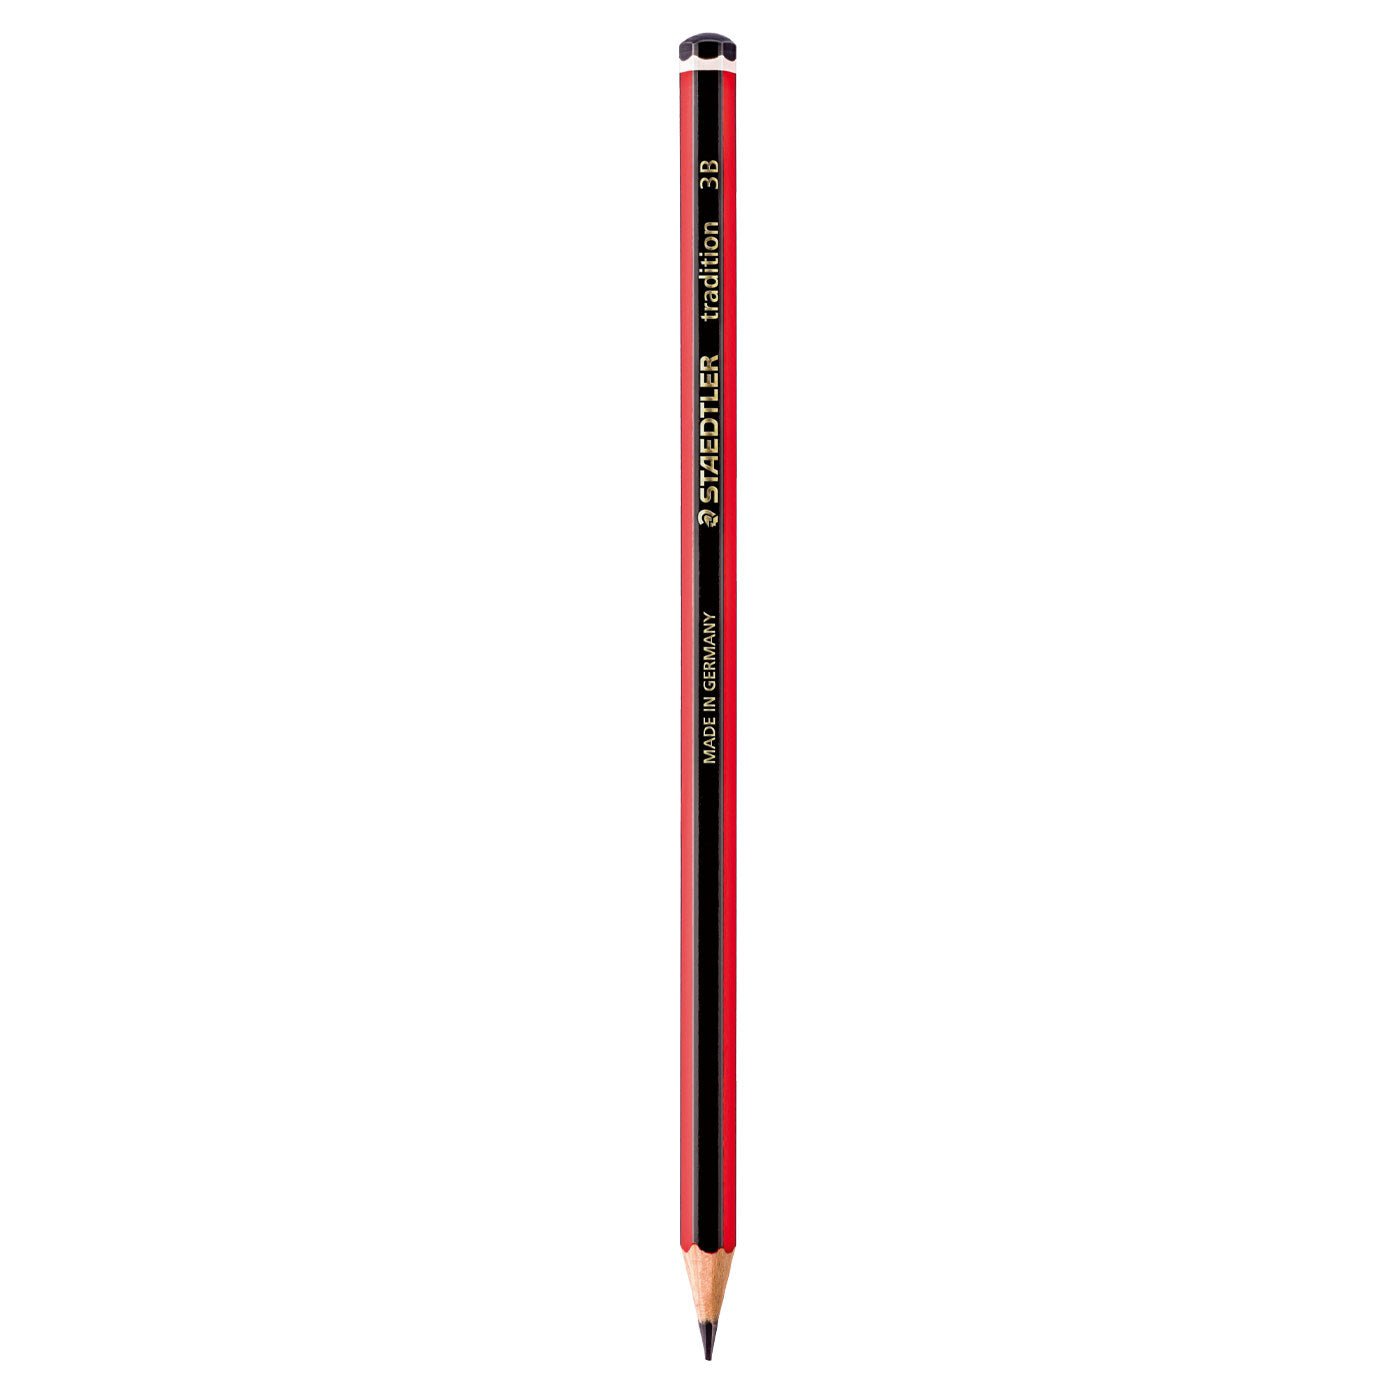 Staedtler Tradition Pencil 3B